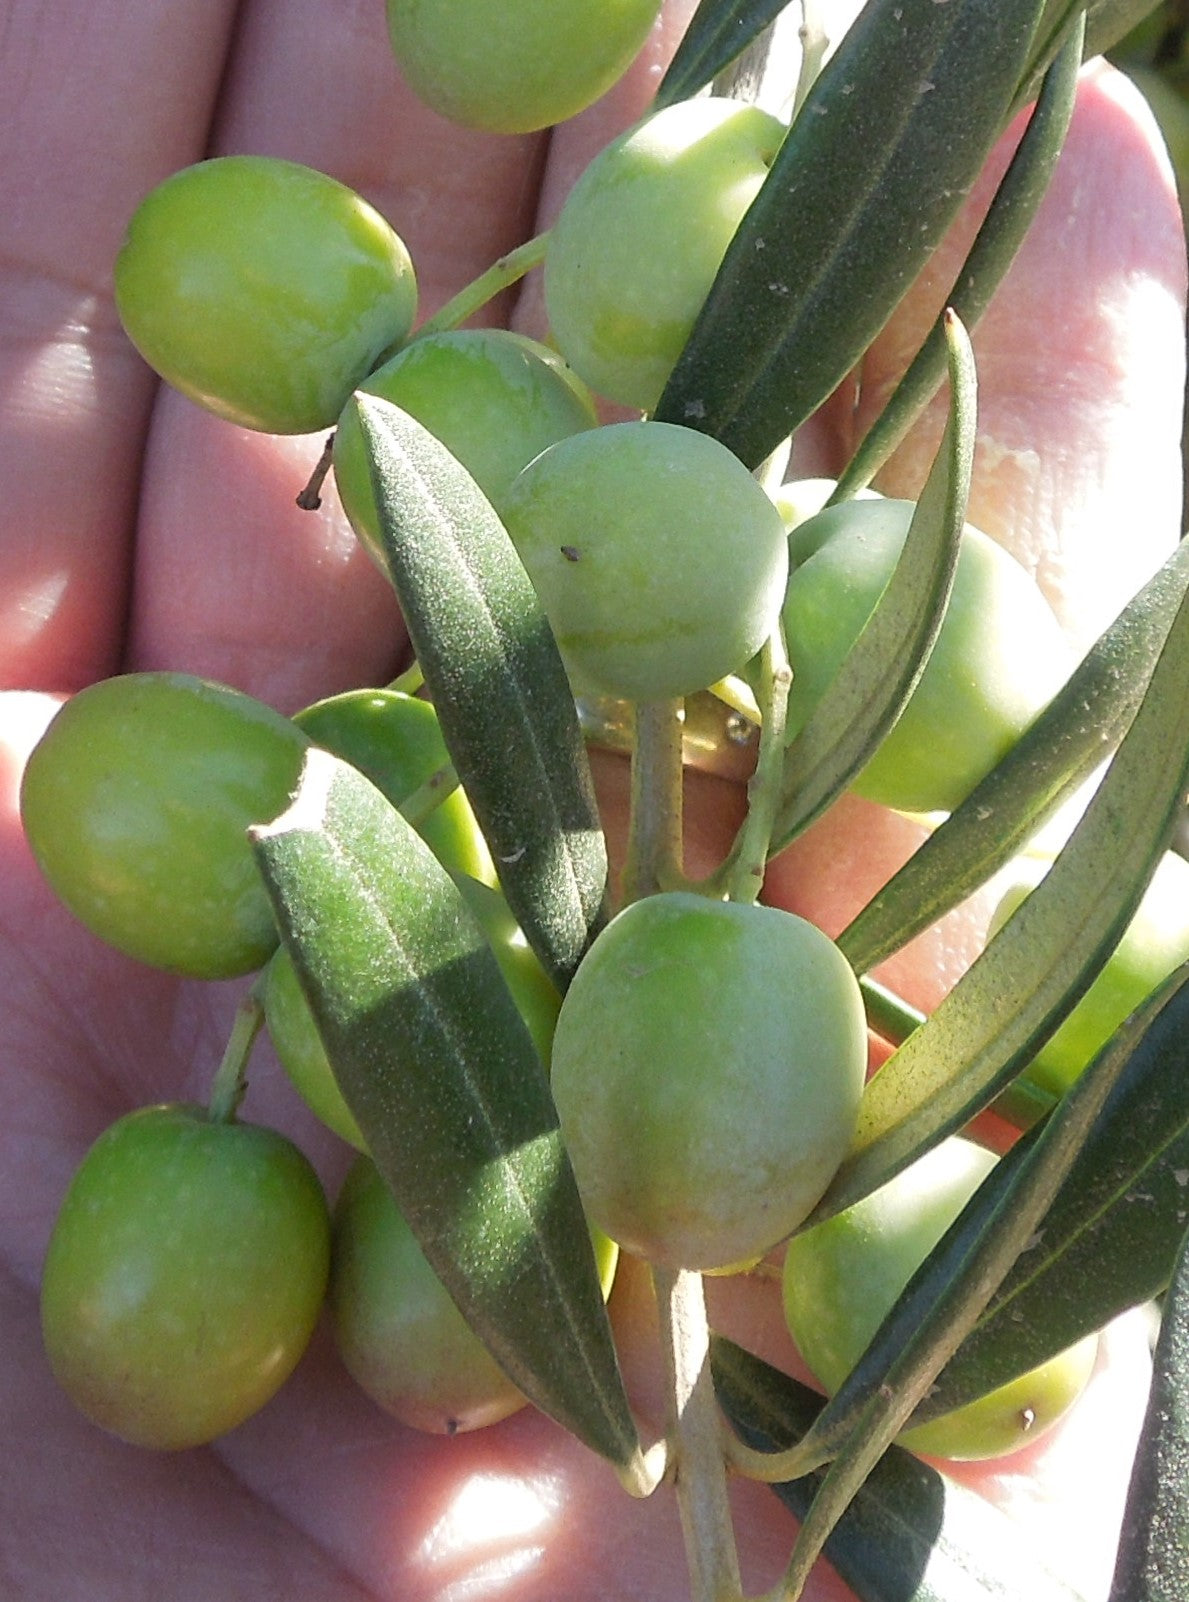 Arbequina Olives resting in my hand 